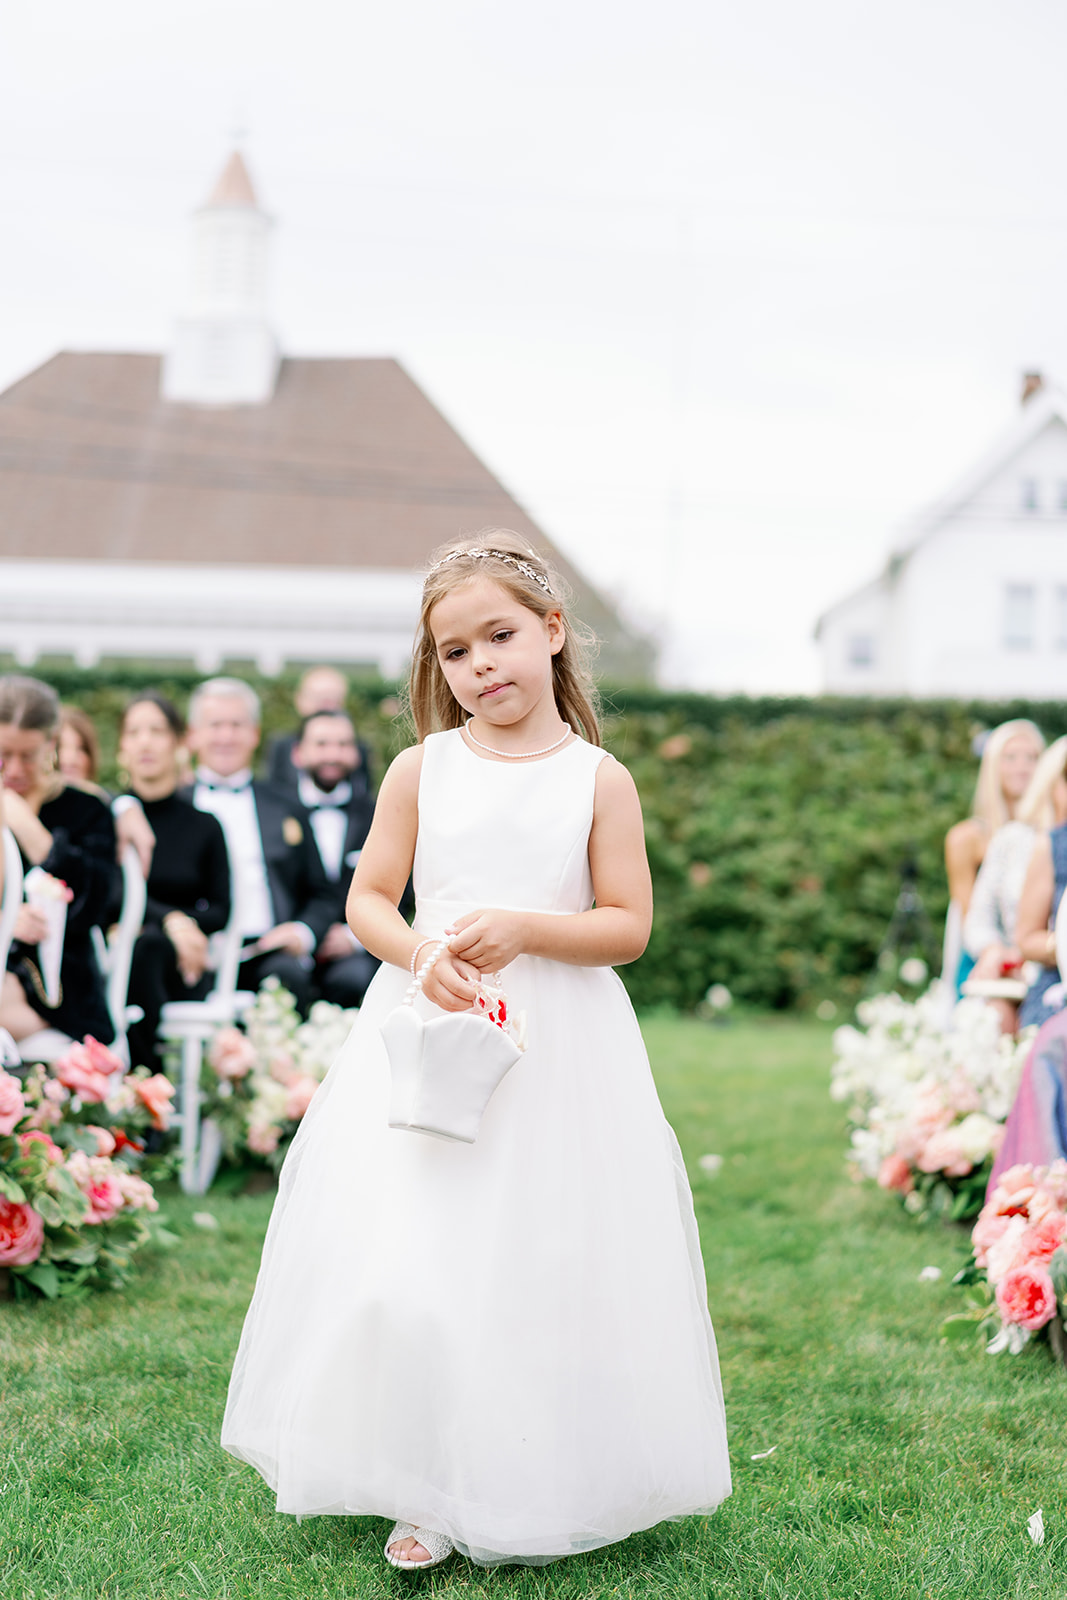 Cute flower girl in a white dress with a basket of petals walking down the aisle. 